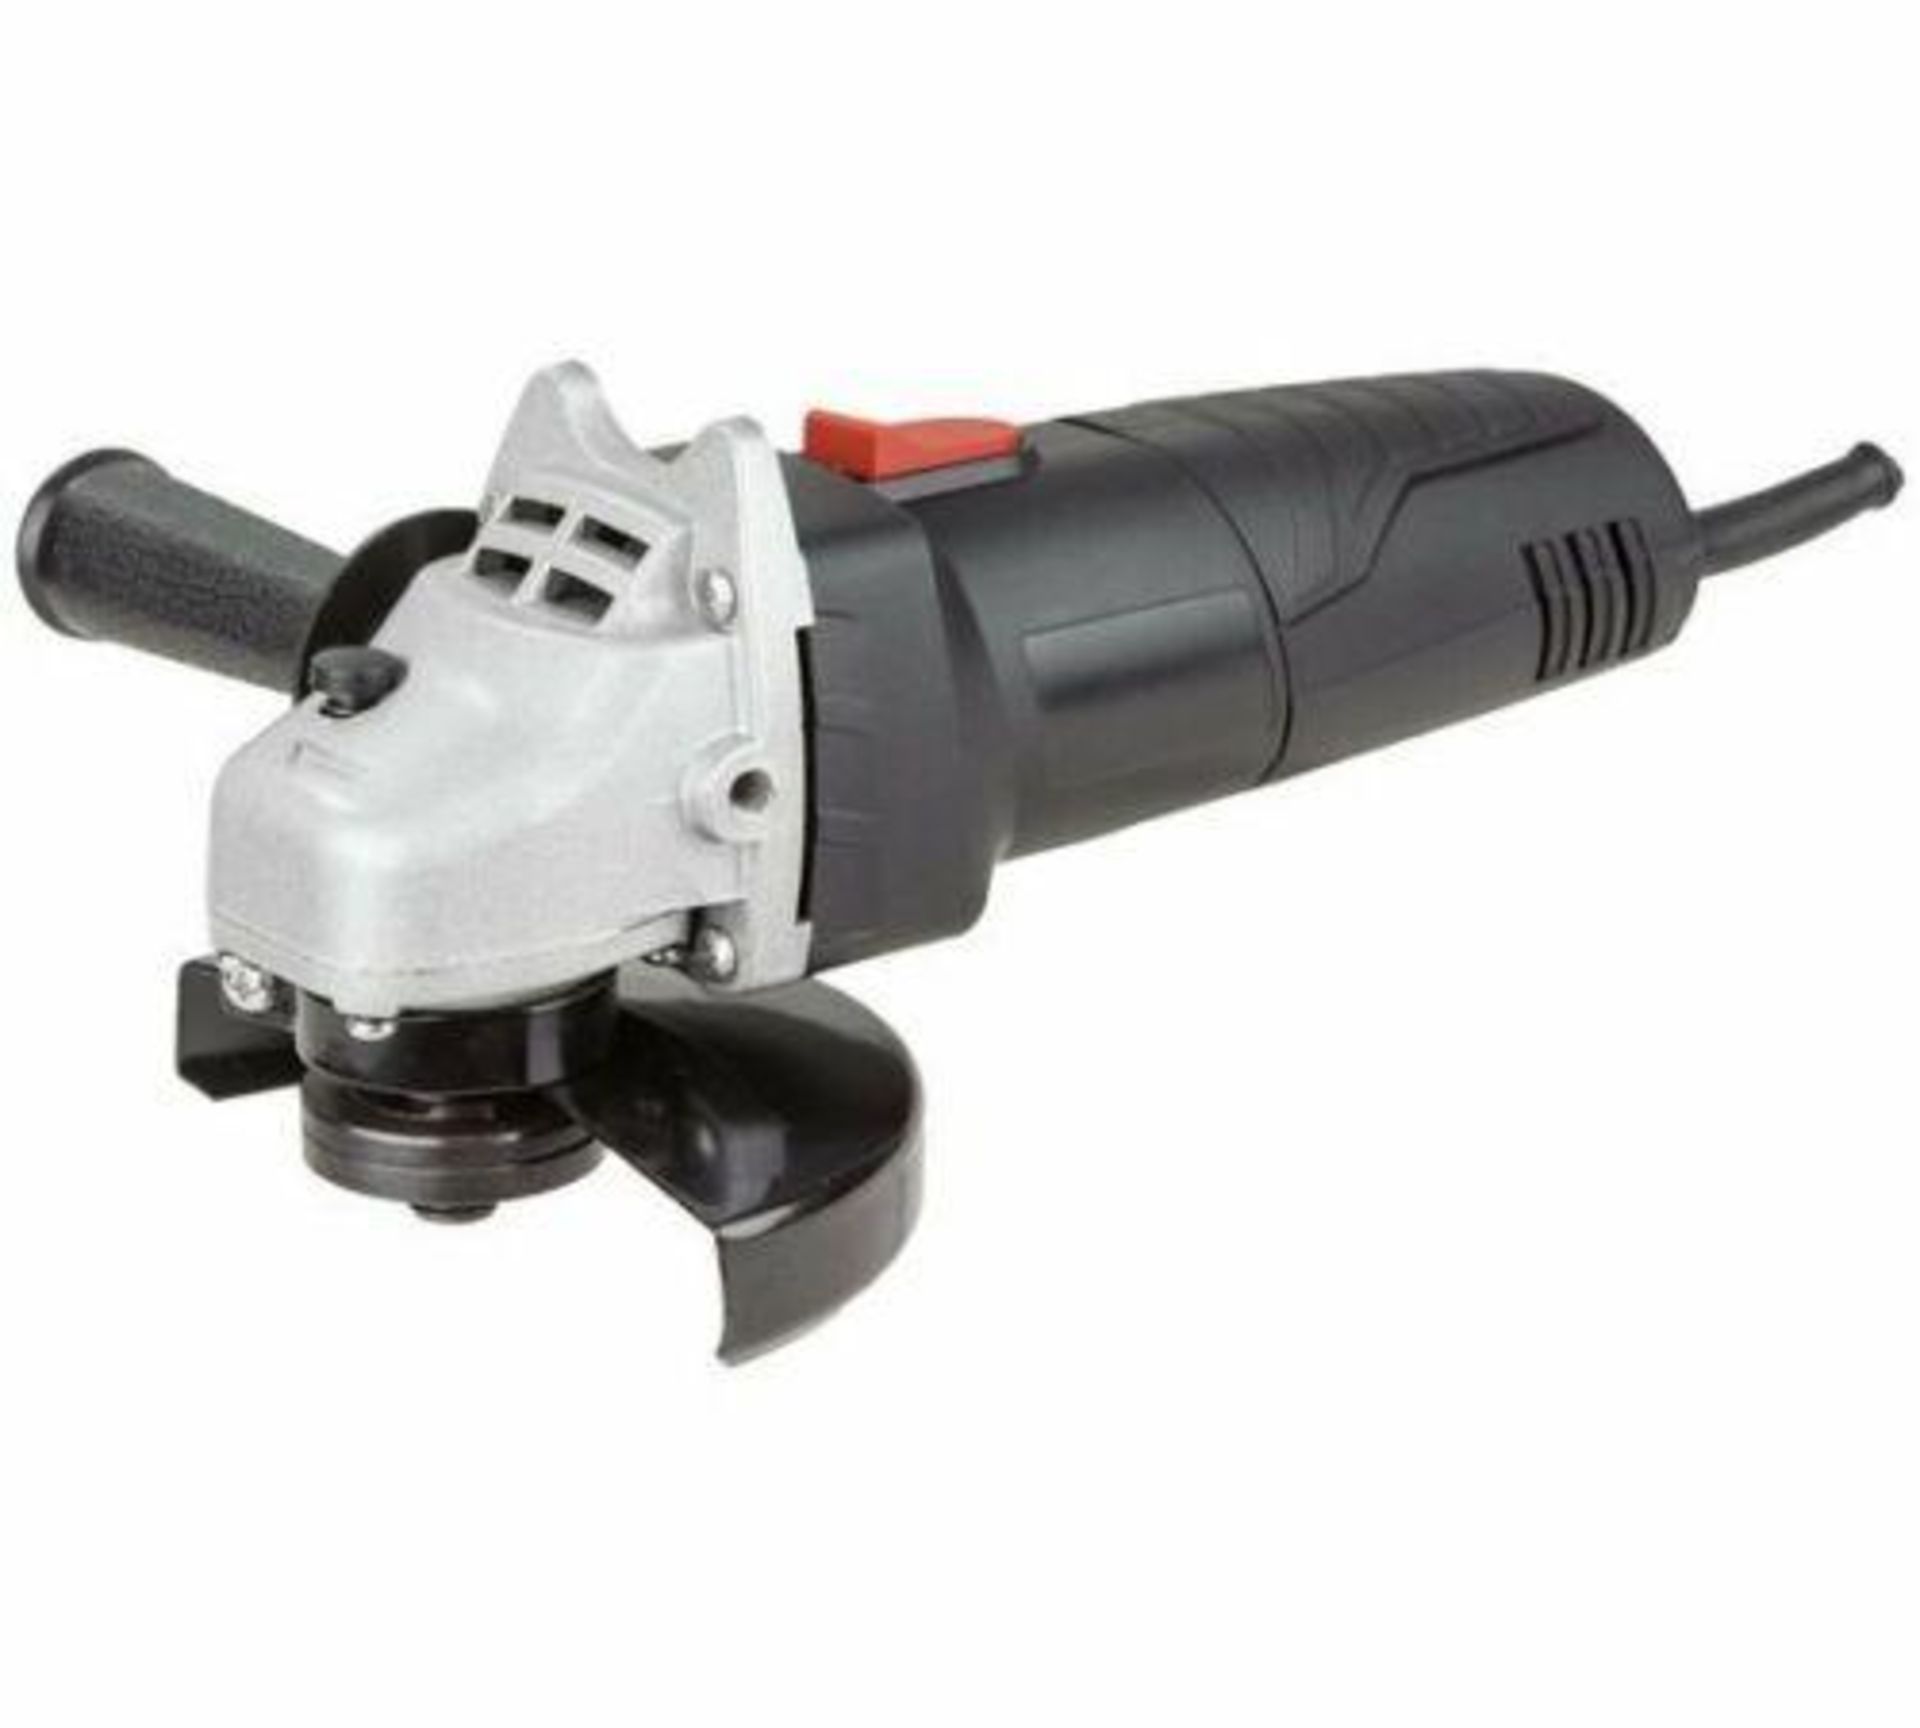 Simple Value 115Mm Angle Grinder Grinding Cutting And De-Rusting Suitable 500WUK - £64.99 RRP